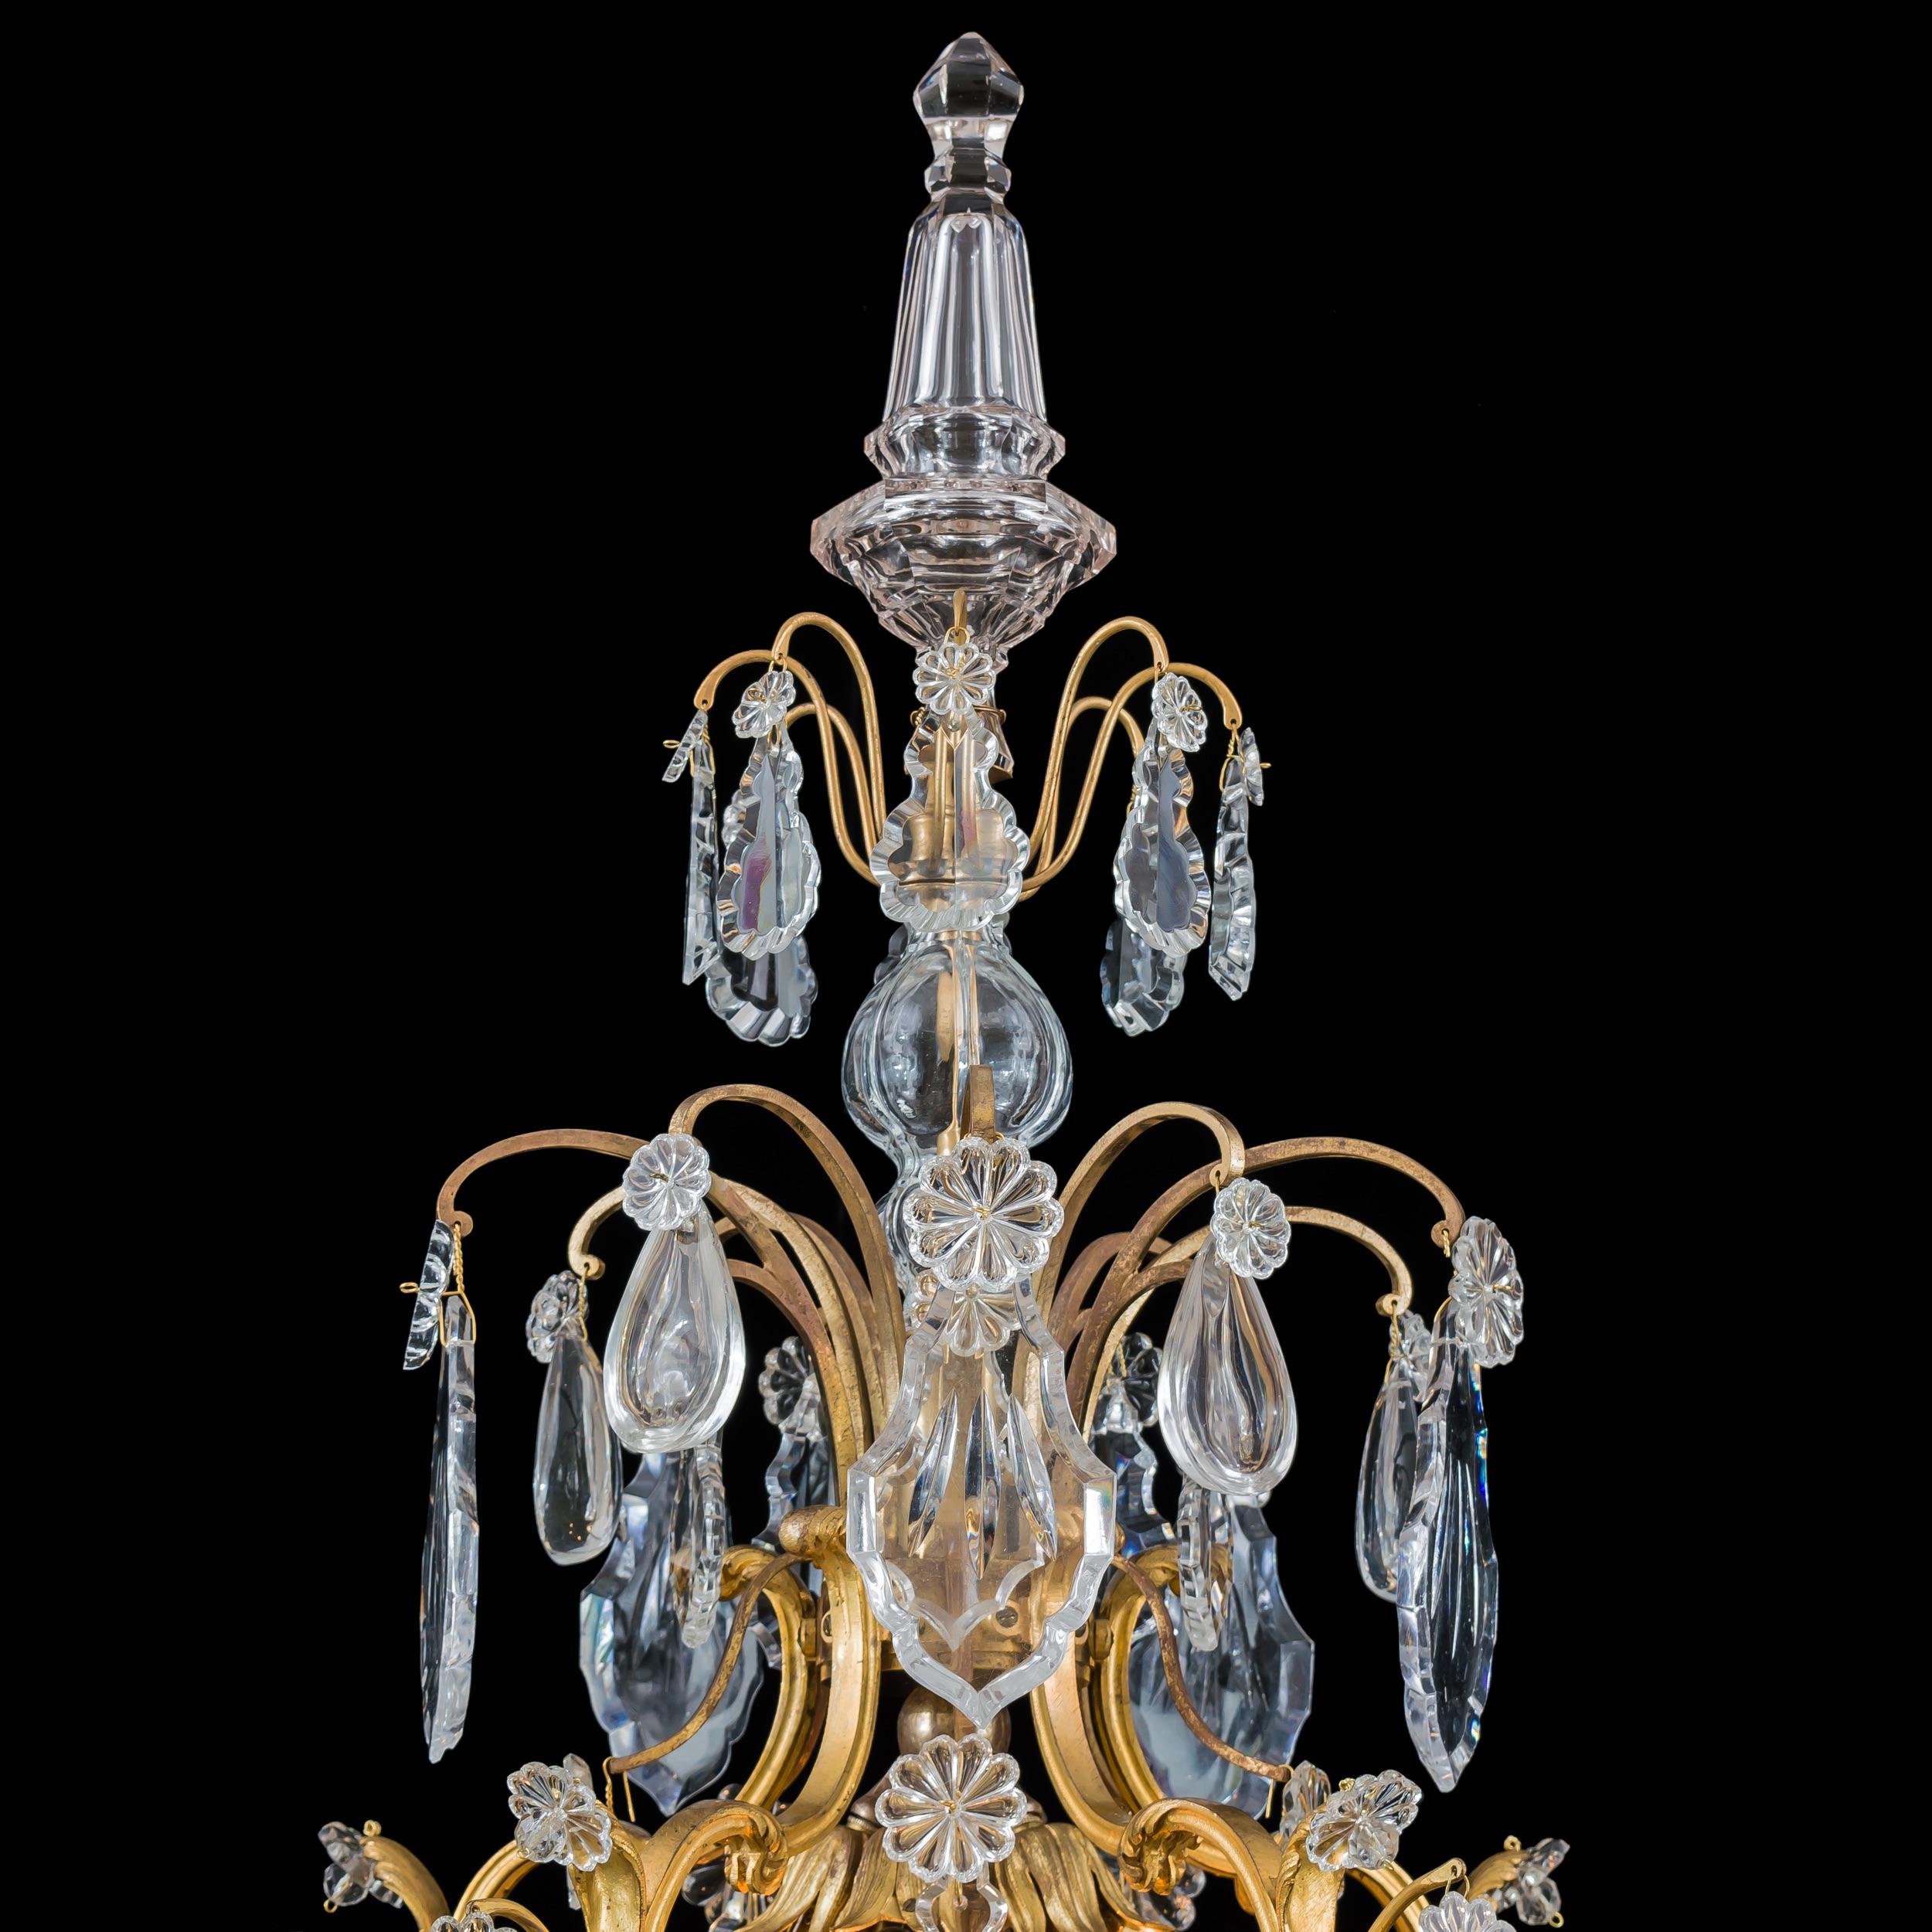 Monumental Pair of Louis XV Style Ormolu and Crystal Girandoles by Baccarat In Excellent Condition For Sale In London, GB